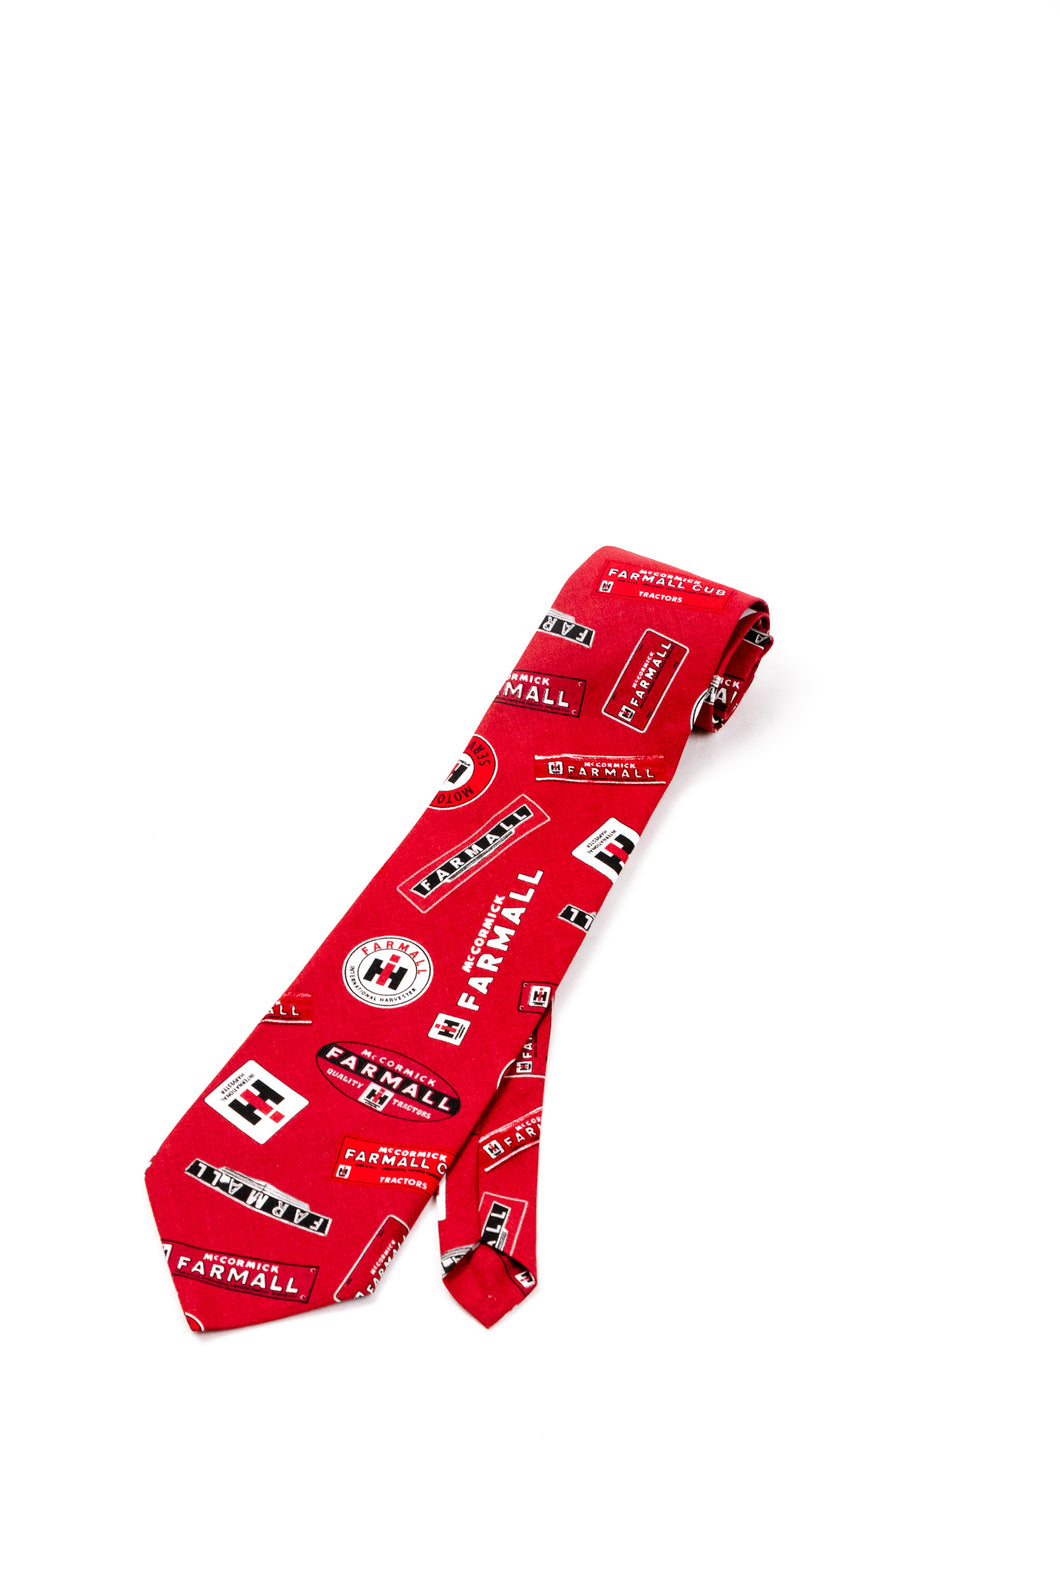 Farmall and IH Logo Necktie, Red, Adult or Youth Size